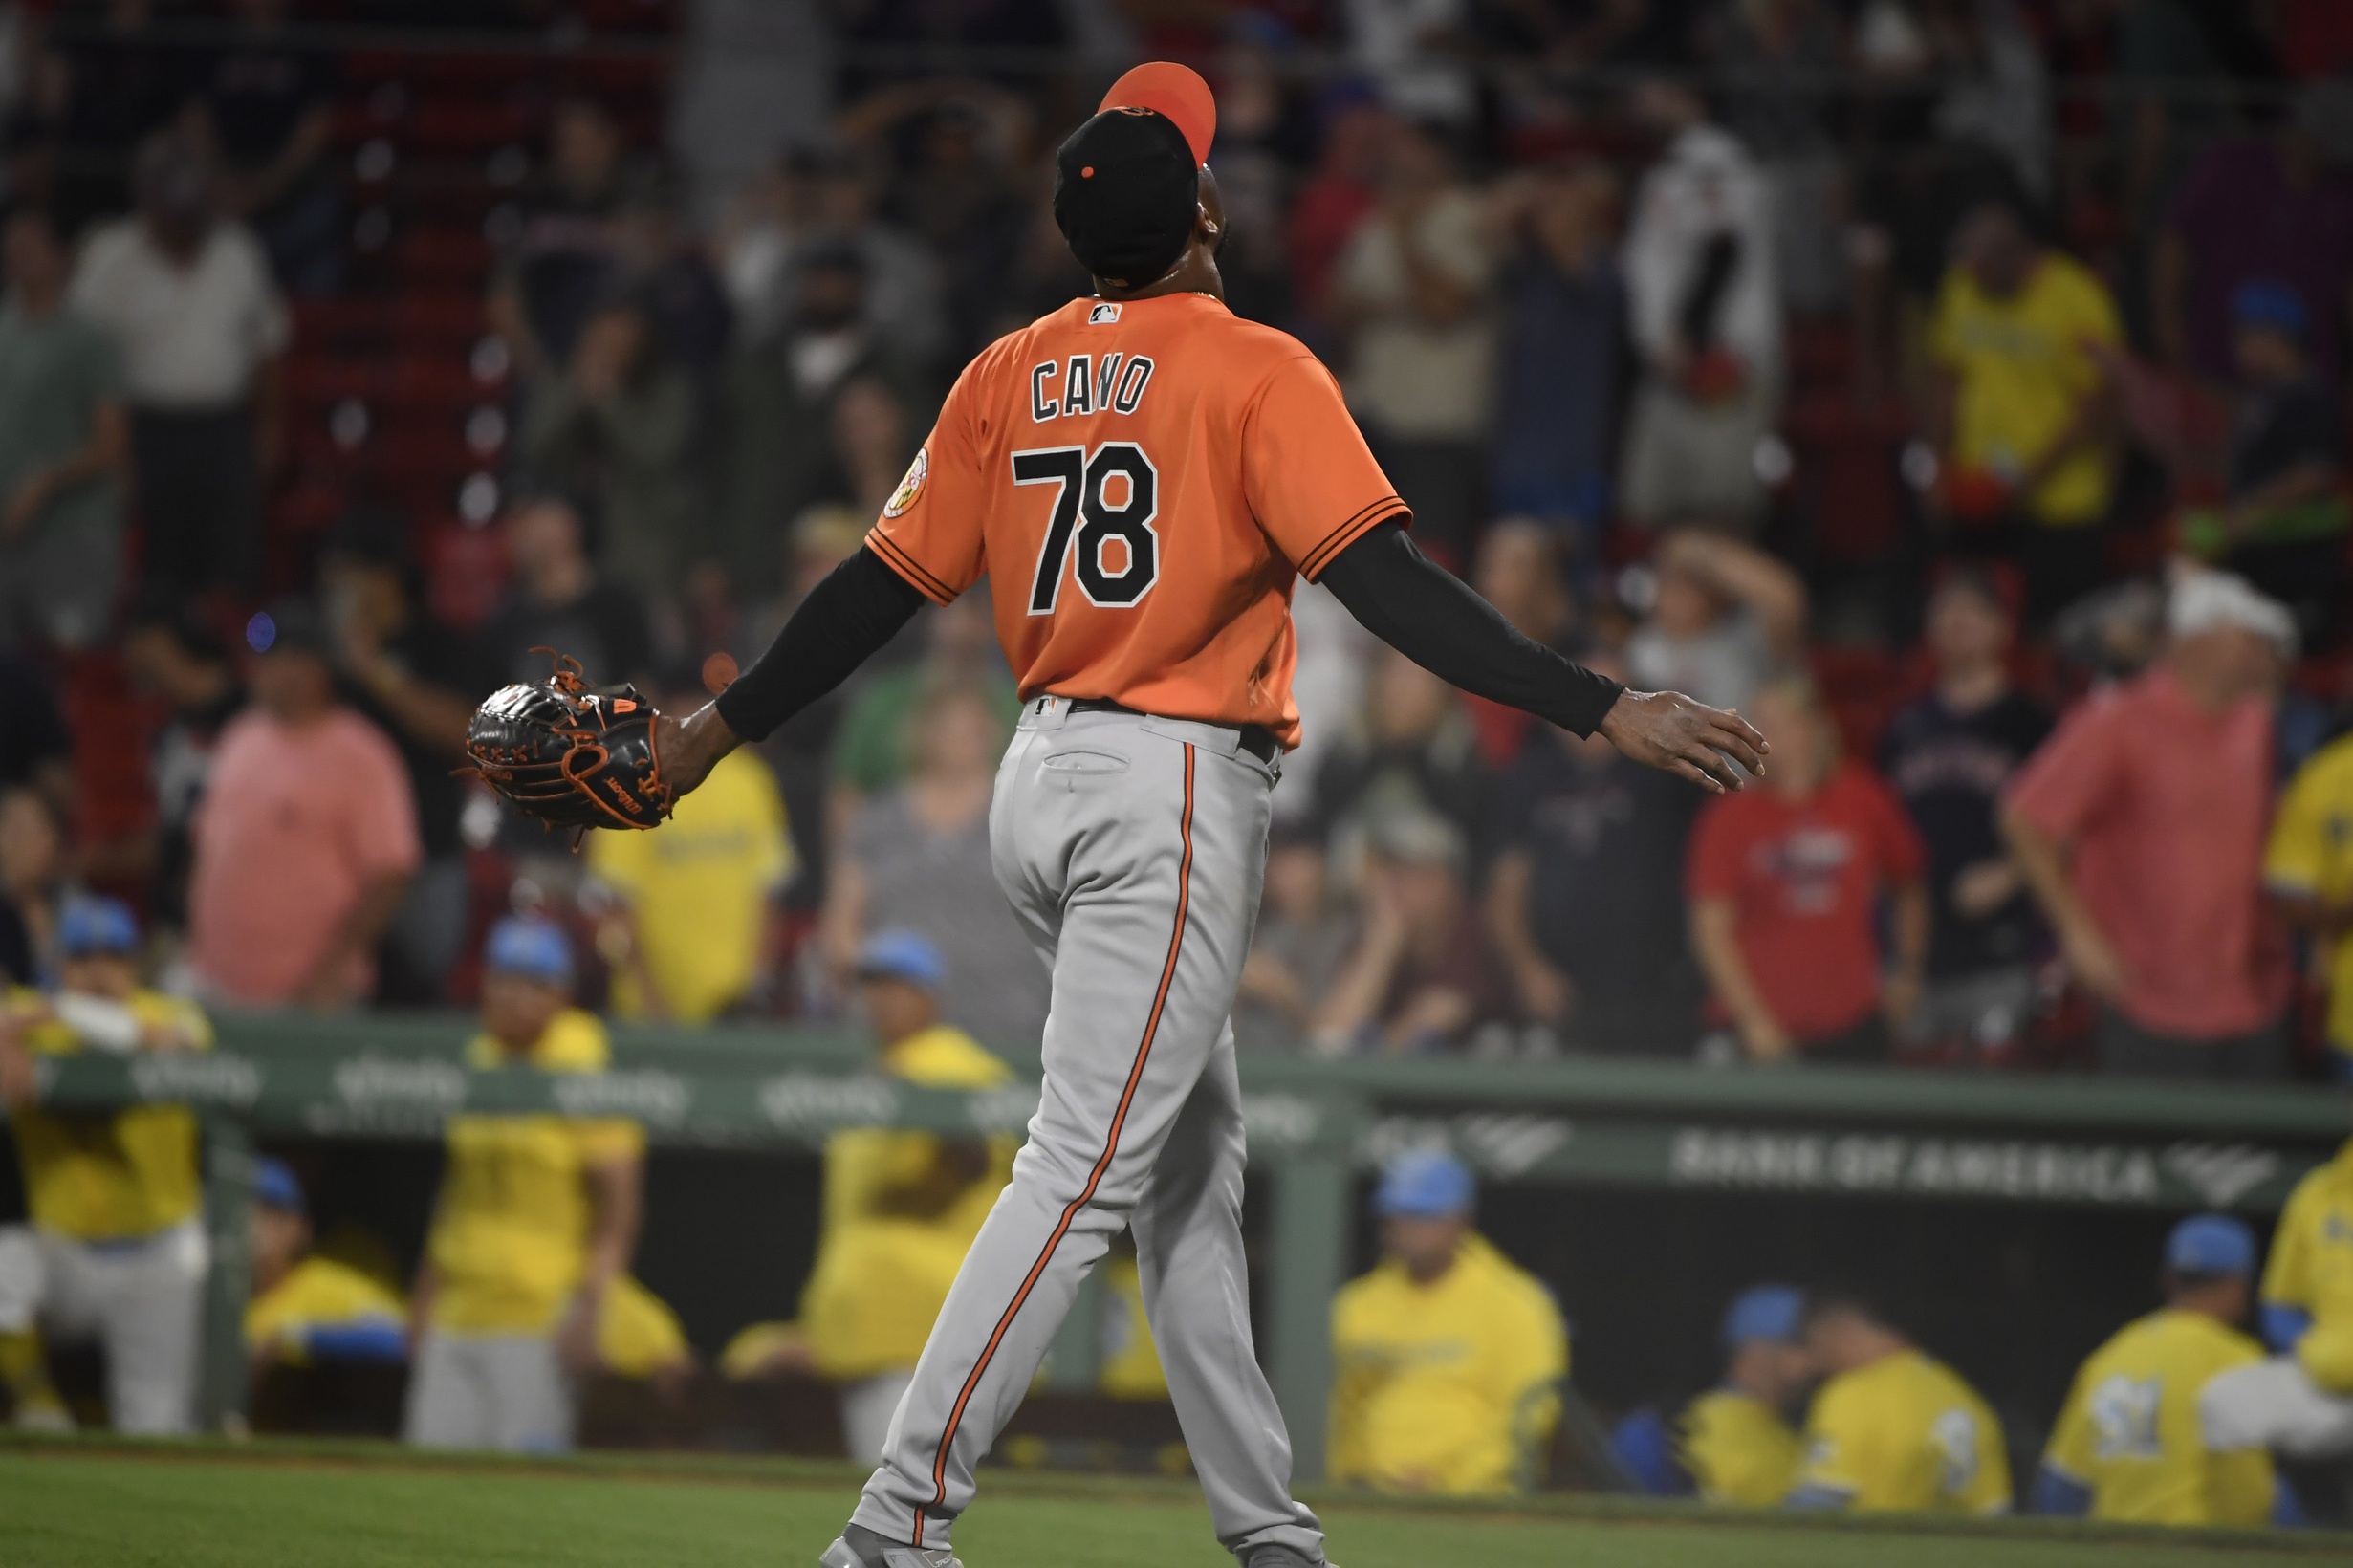 Orioles hang on to beat Red Sox 13-12 for 7th straight win as